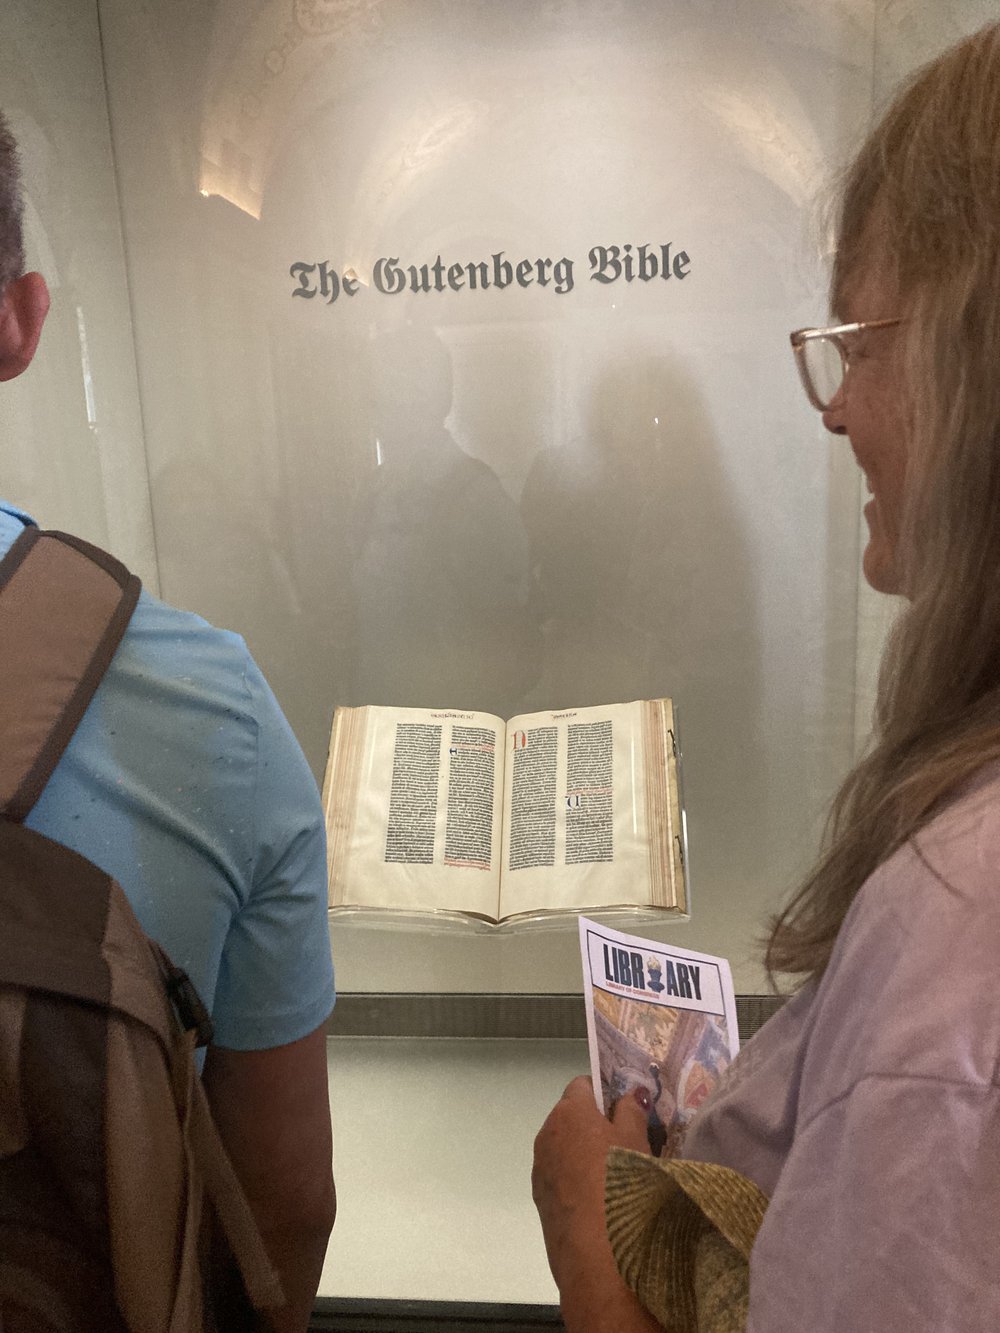 Looking at the Gutenberg Bible.